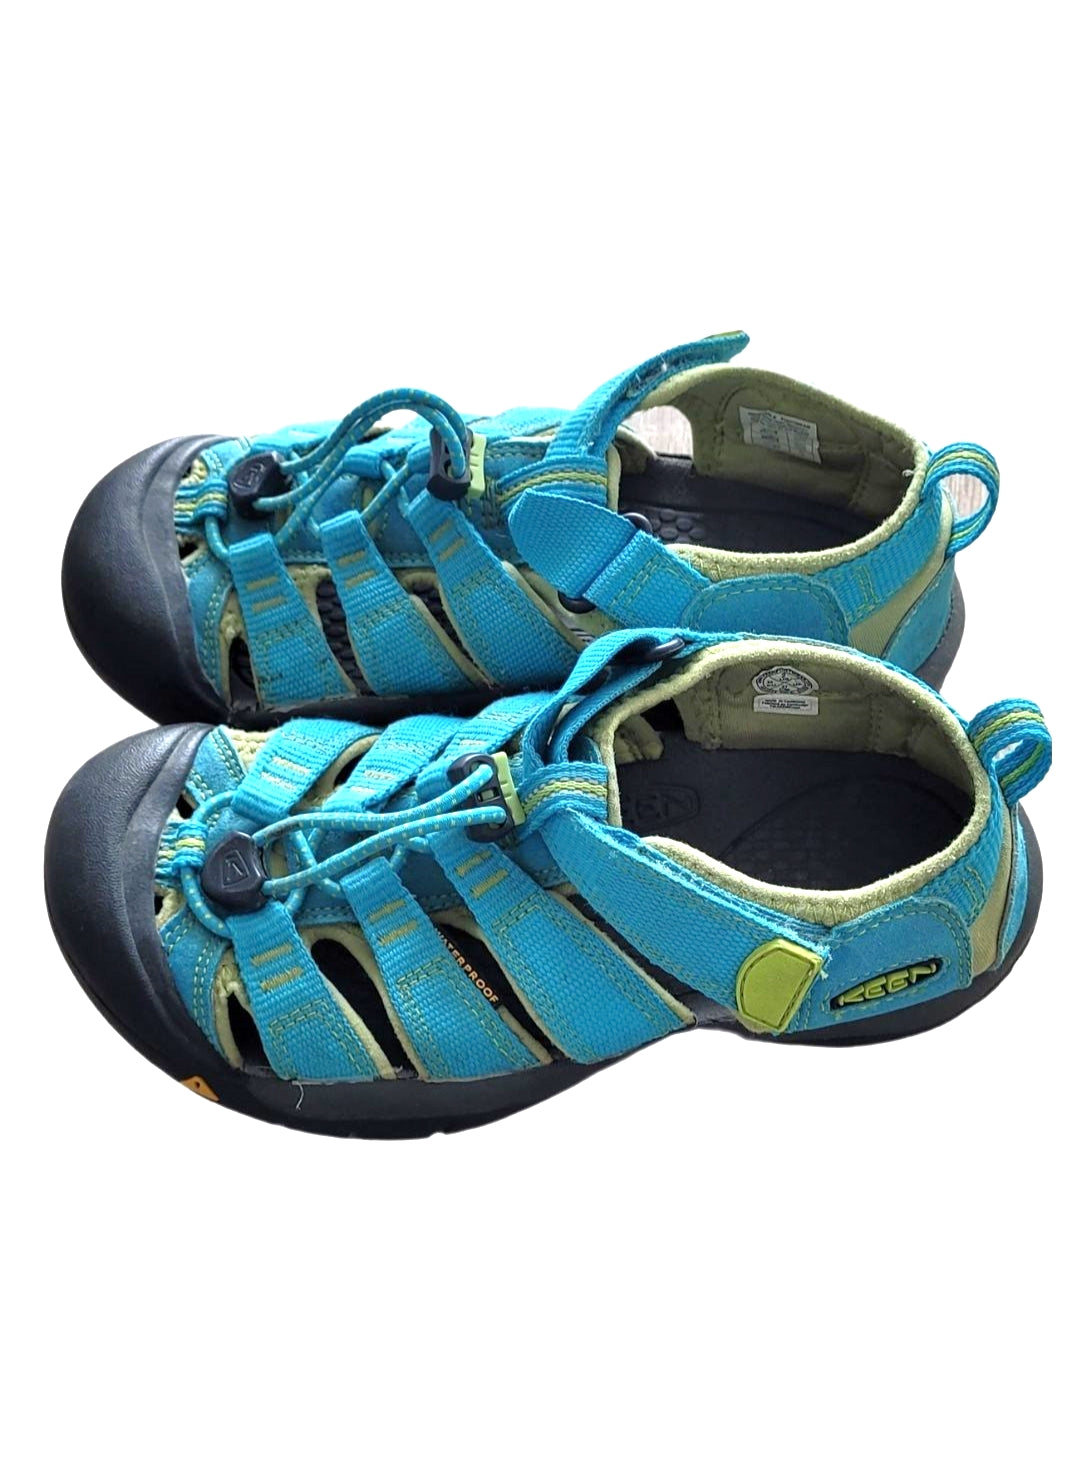 Used Kids Newport Water Sandals by KEEN Big Kids' Size 2-Blue and Green